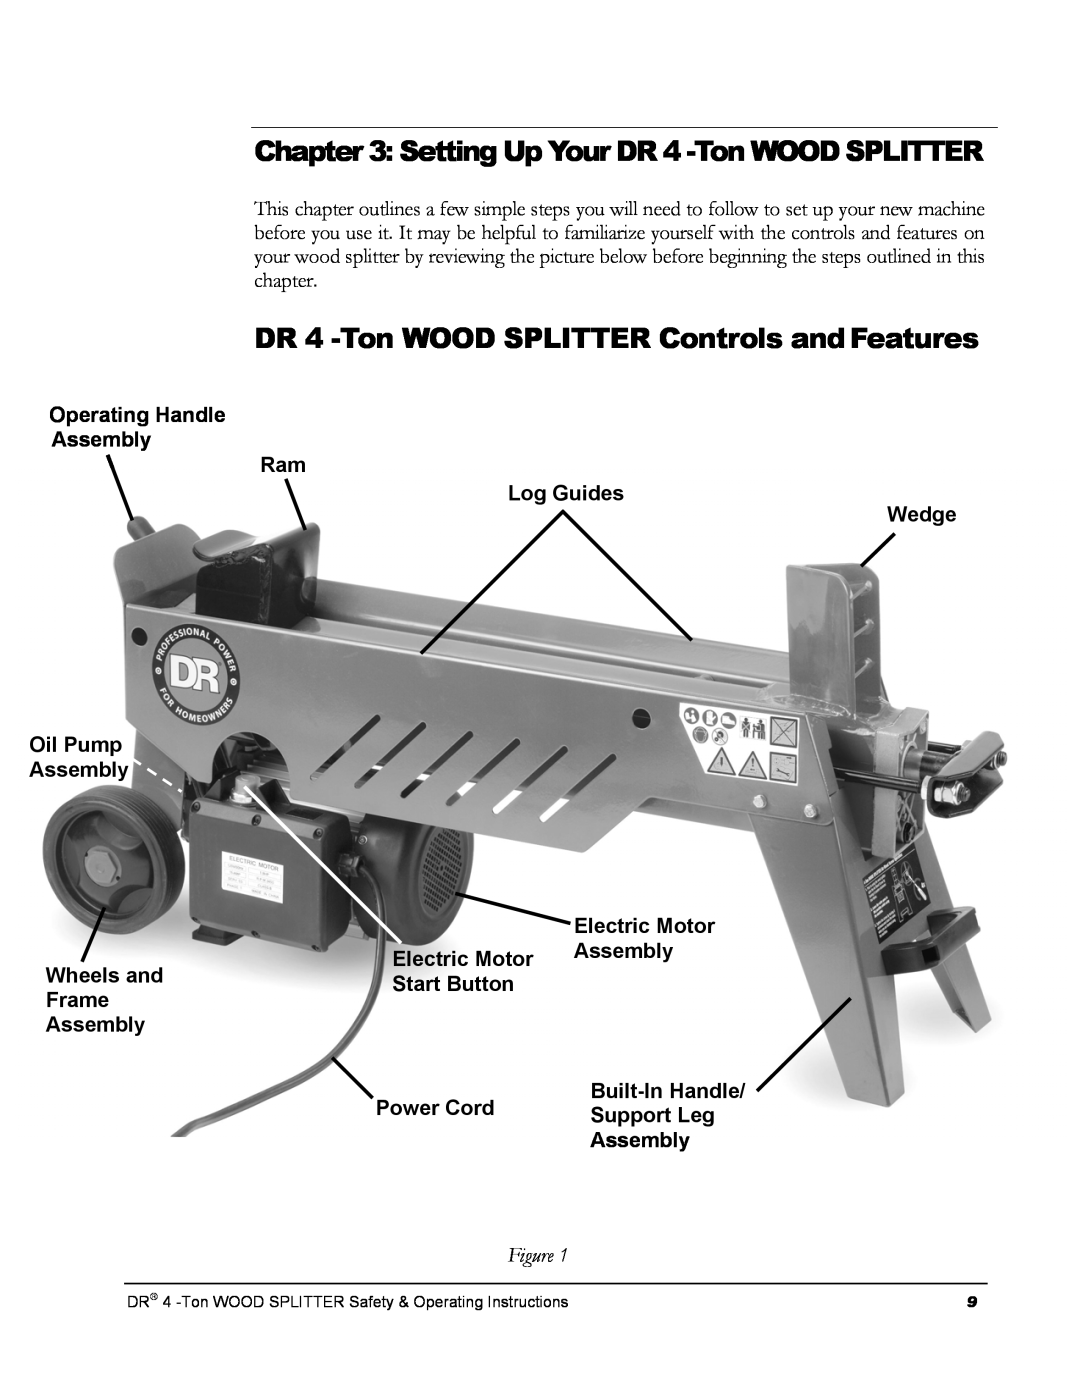 Country Home Products DR 4 -TON manual Setting Up Your DR 4 -TonWOOD SPLITTER, DR 4 -TonWOOD SPLITTER Controls and Features 